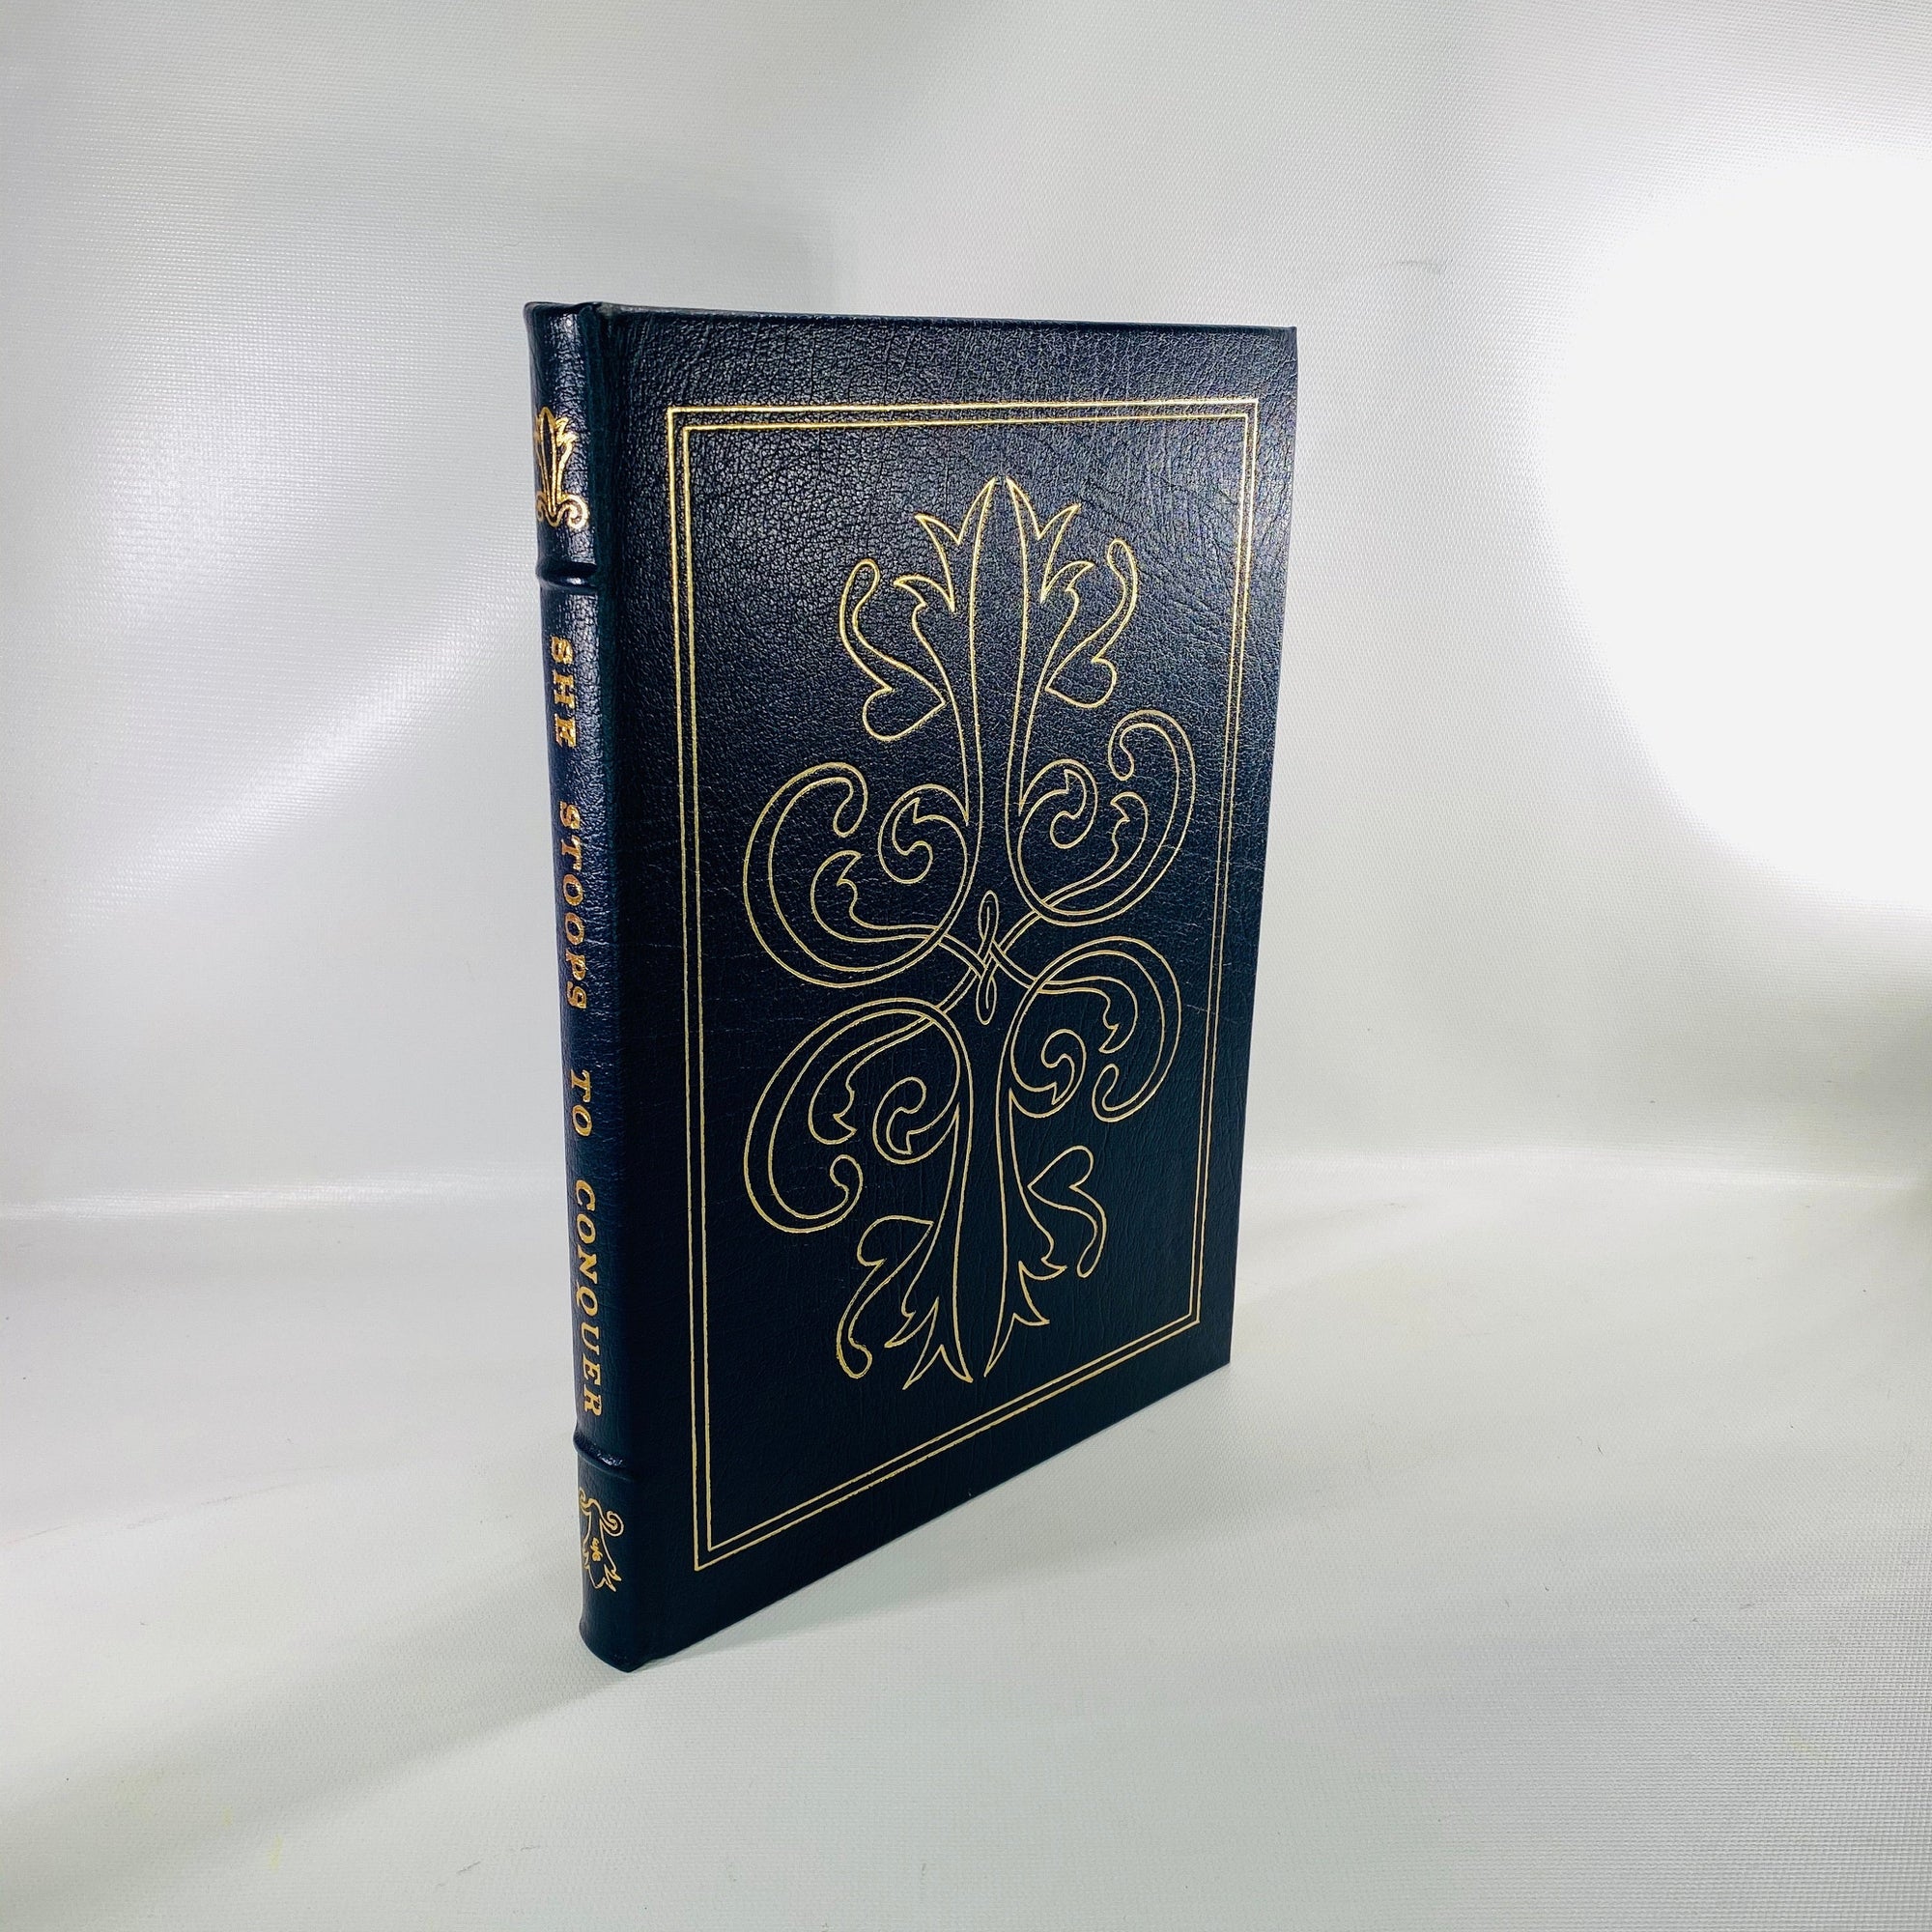 She Stoops to Conquer or The Mistakes of a Night A Novel by Oliver Goldsmith 1978 Easton Press part of the 100 Greatest Books